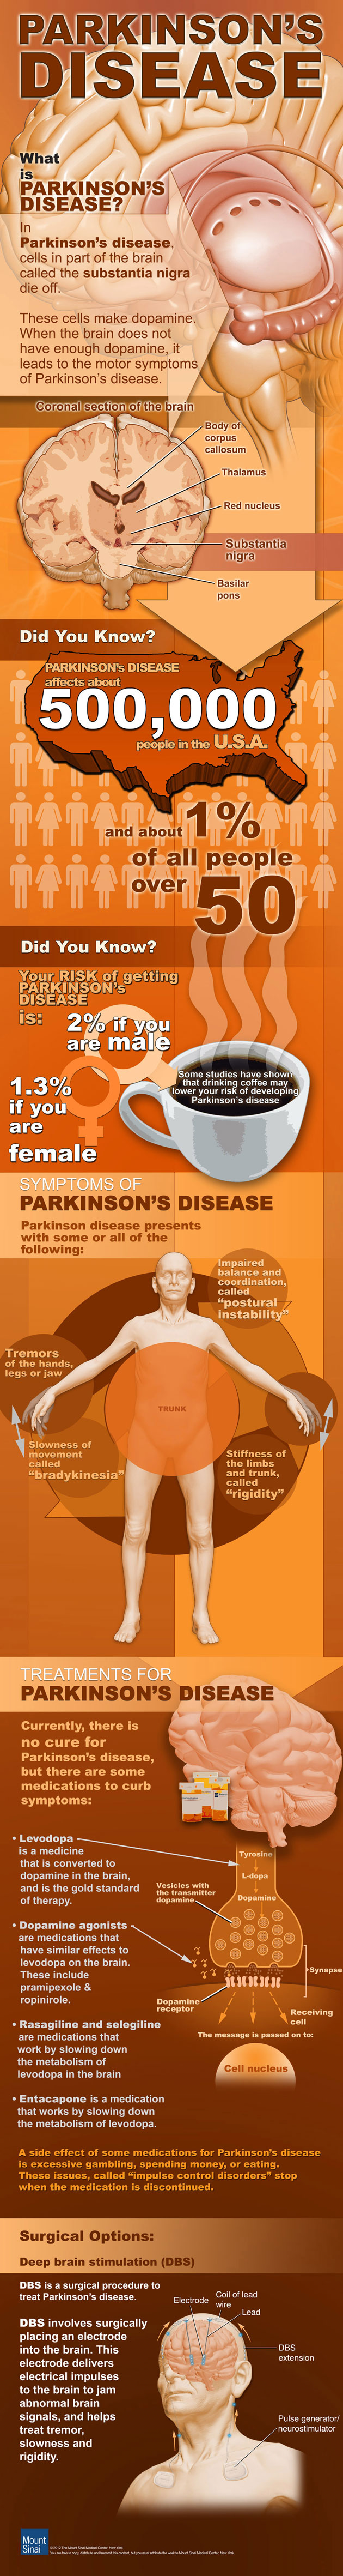 Everything You Should Know About Parkinson's Disease Infographic